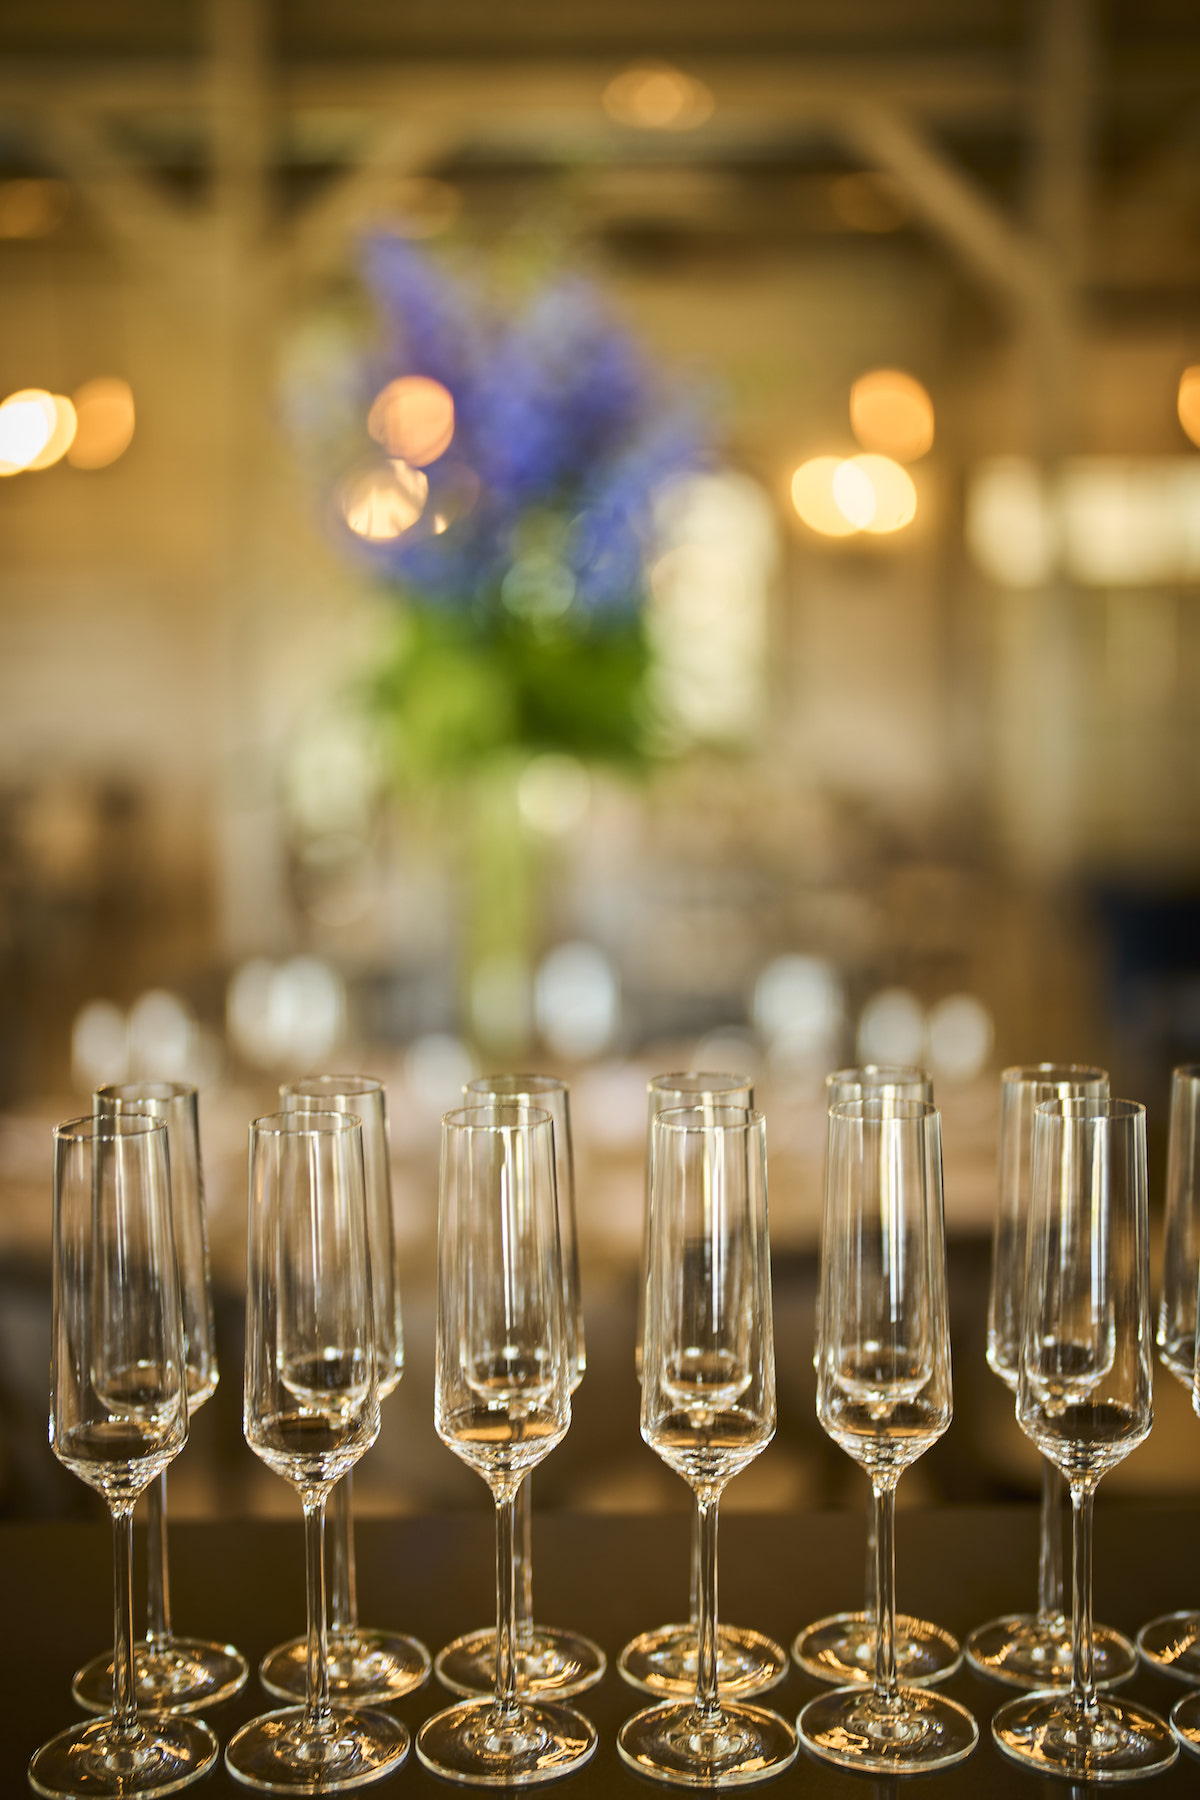 Champagne glasses sit on bar at sophisticated wedding